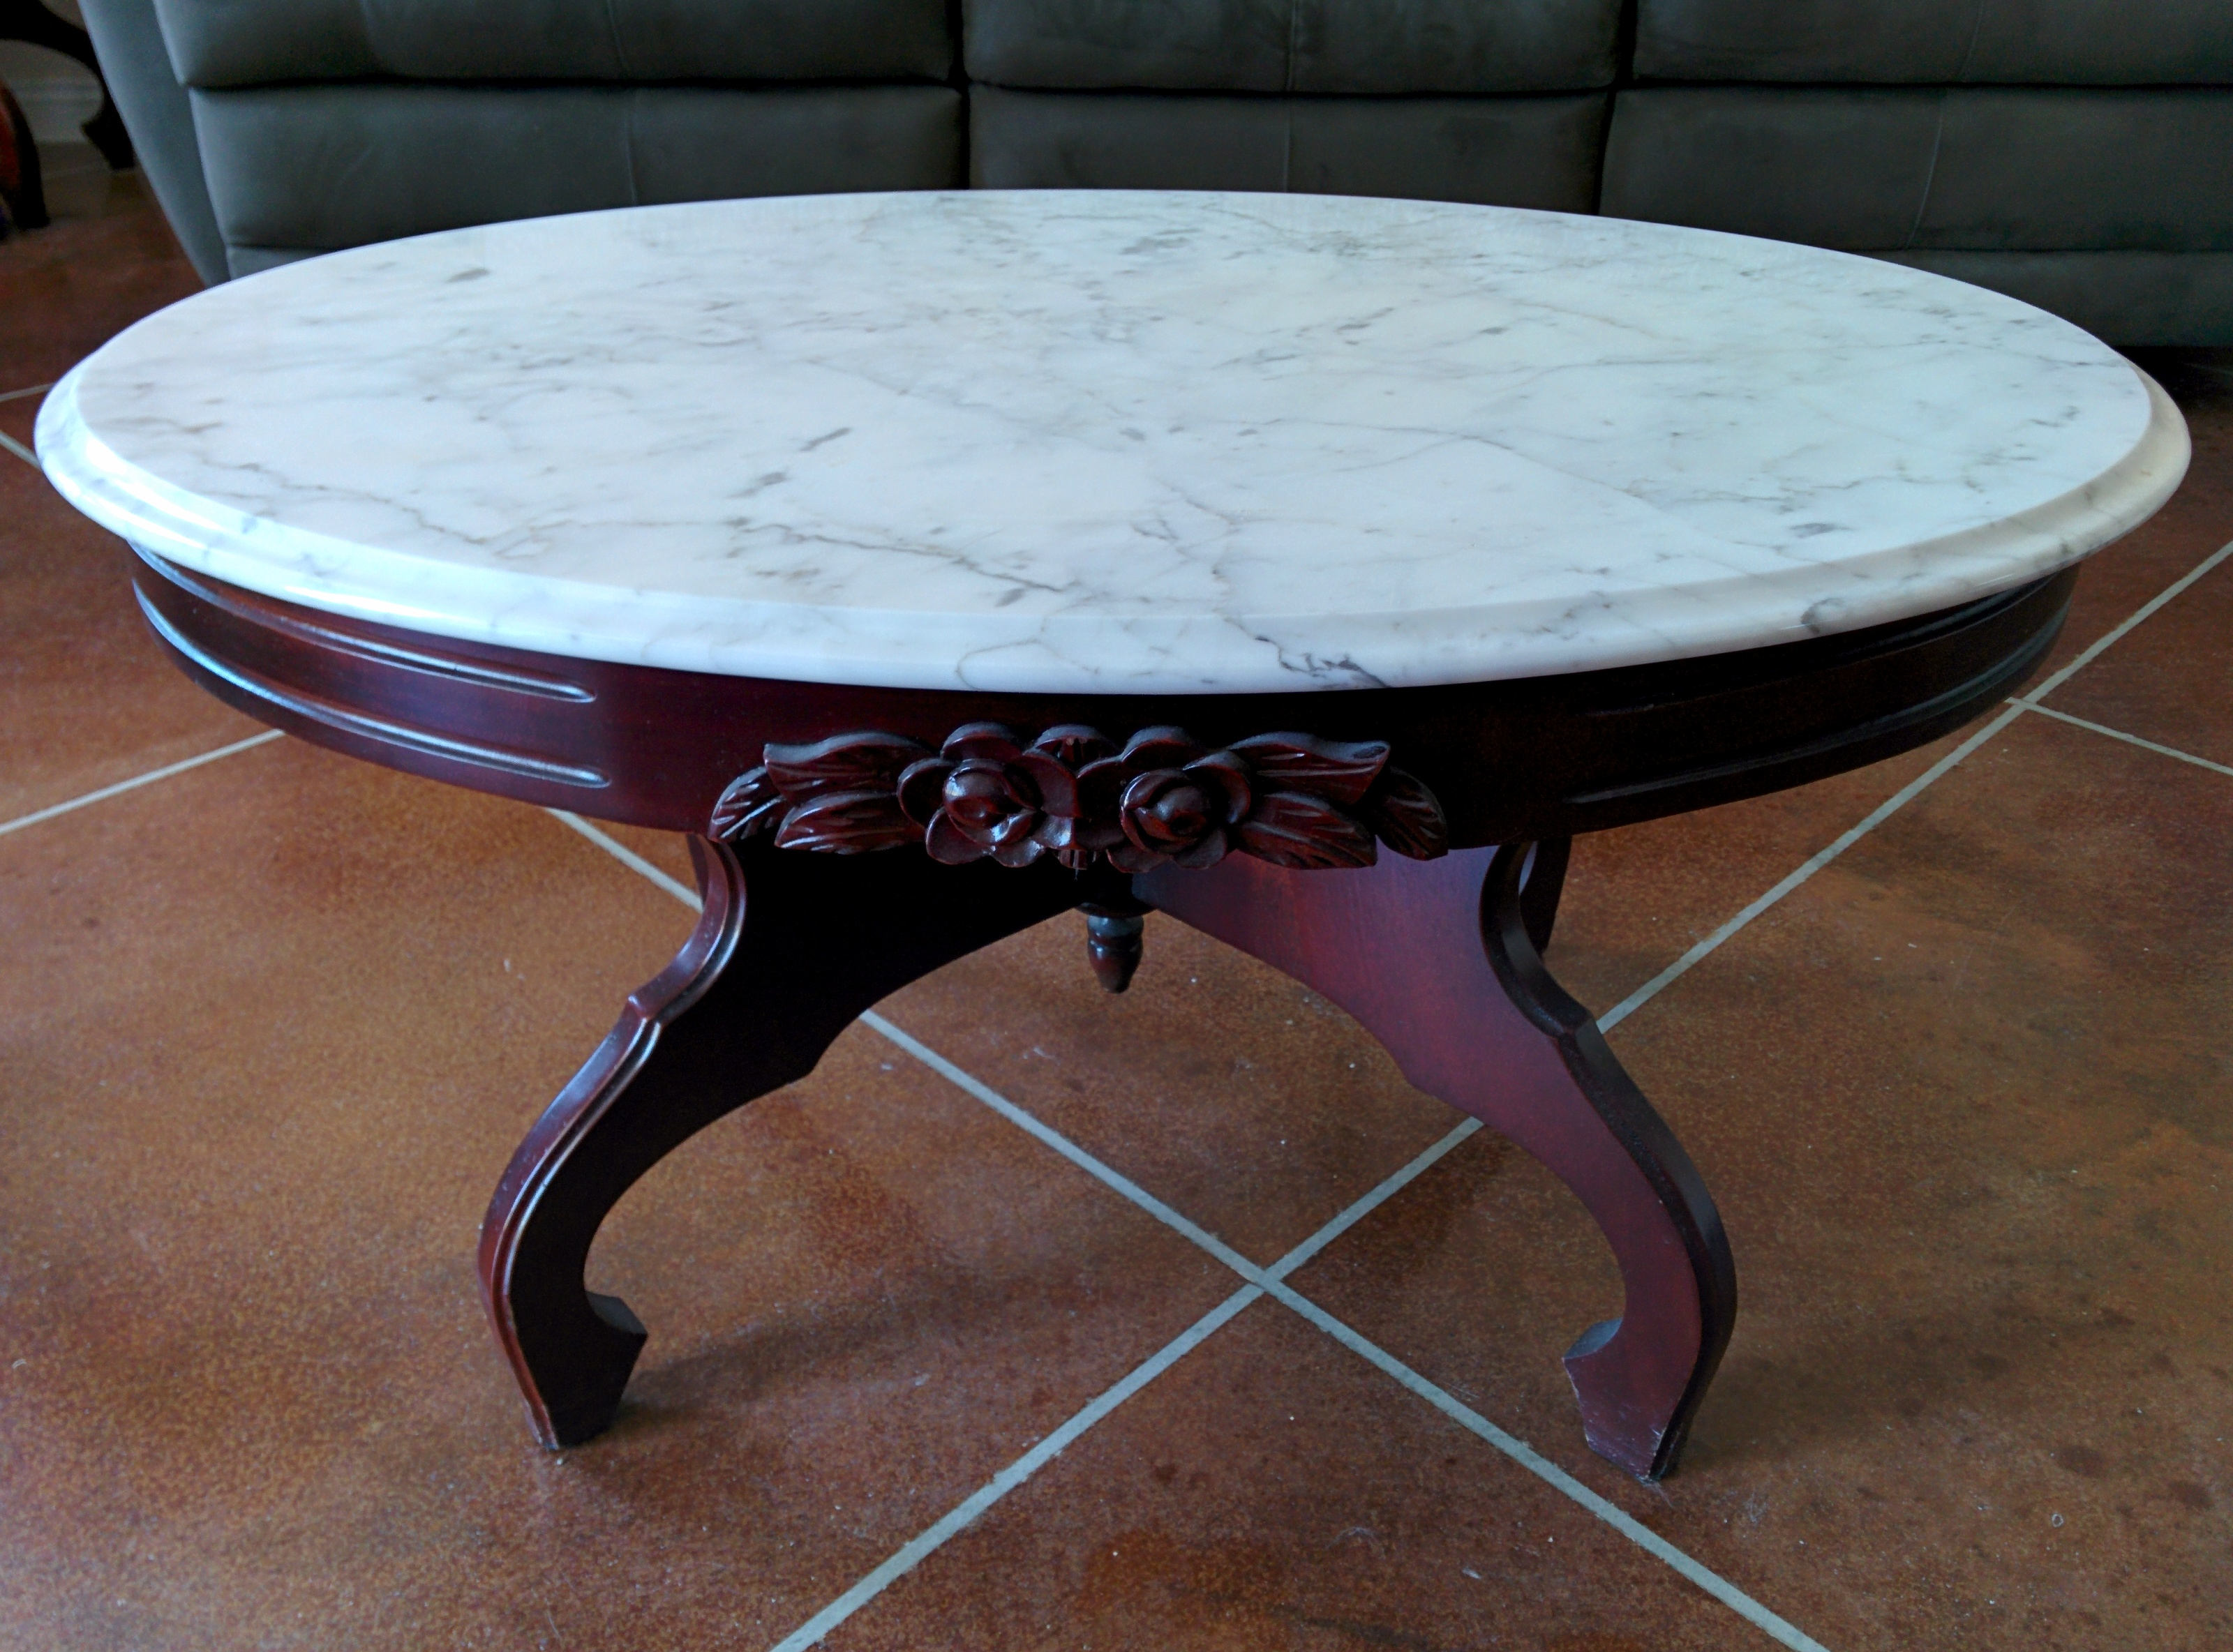 Antique Marble Coffee Table Hipenmoedernl within measurements 3200 X 2368